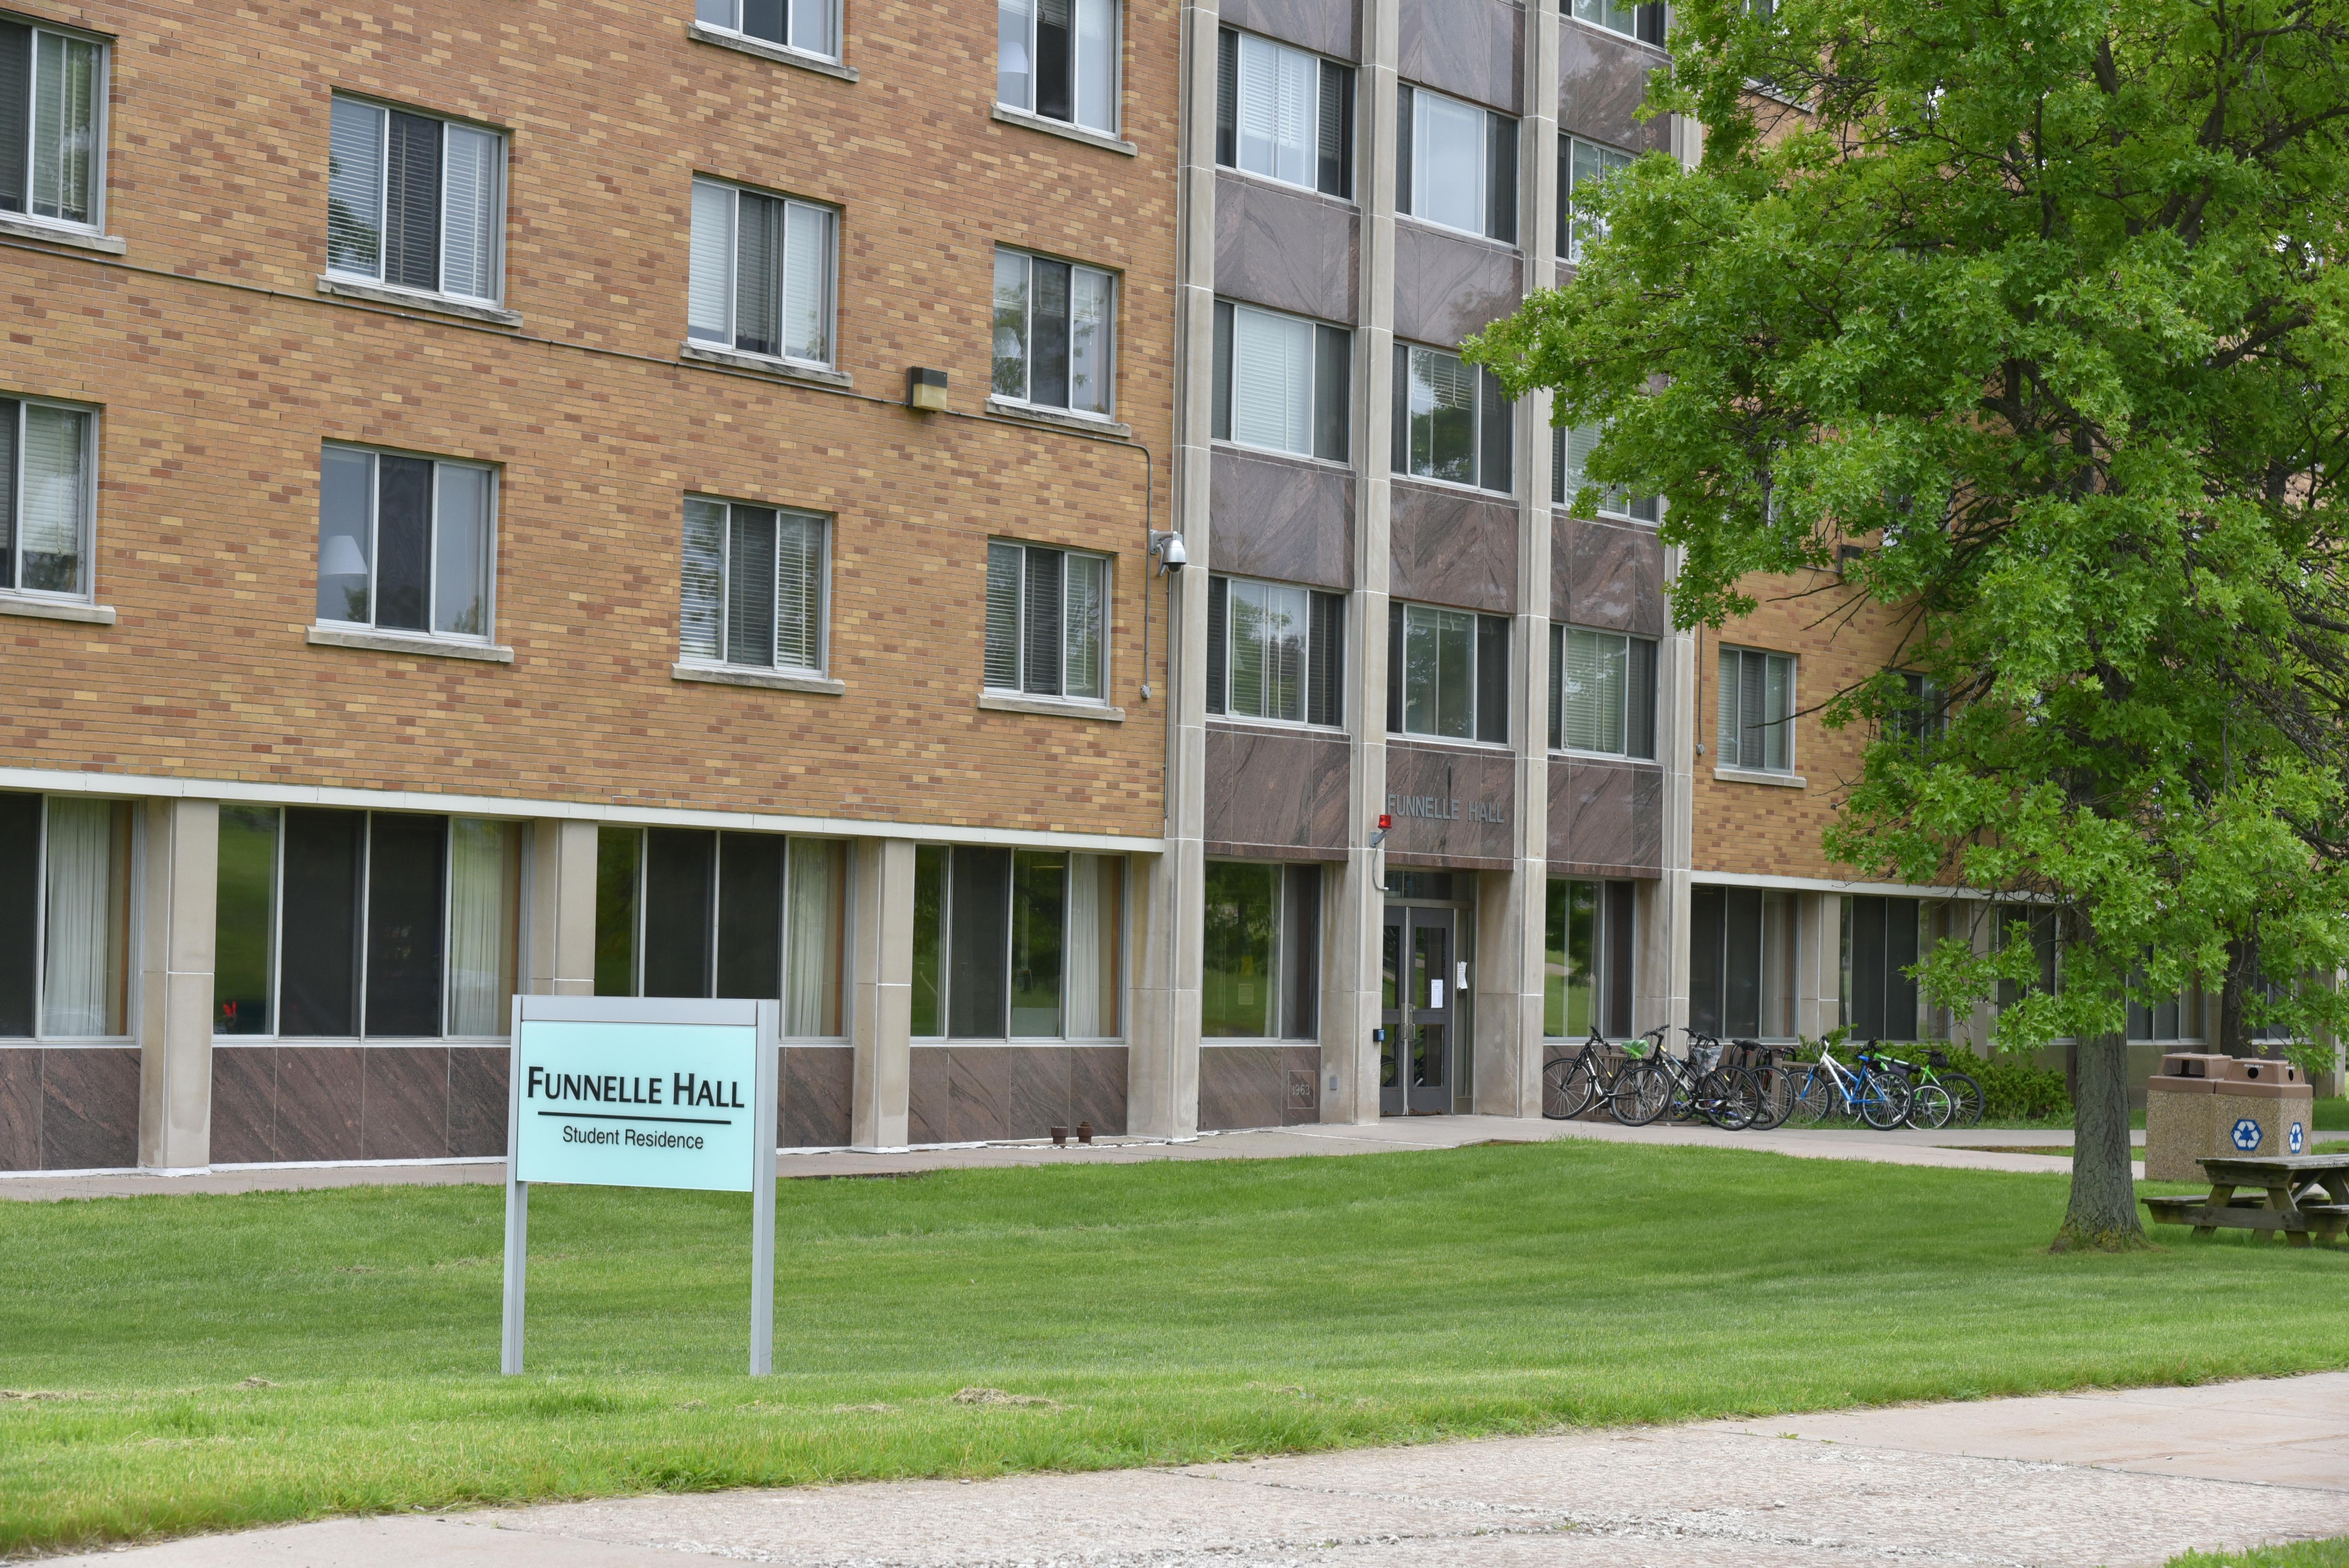 Funnelle Hall on the SUNY Oswego campus